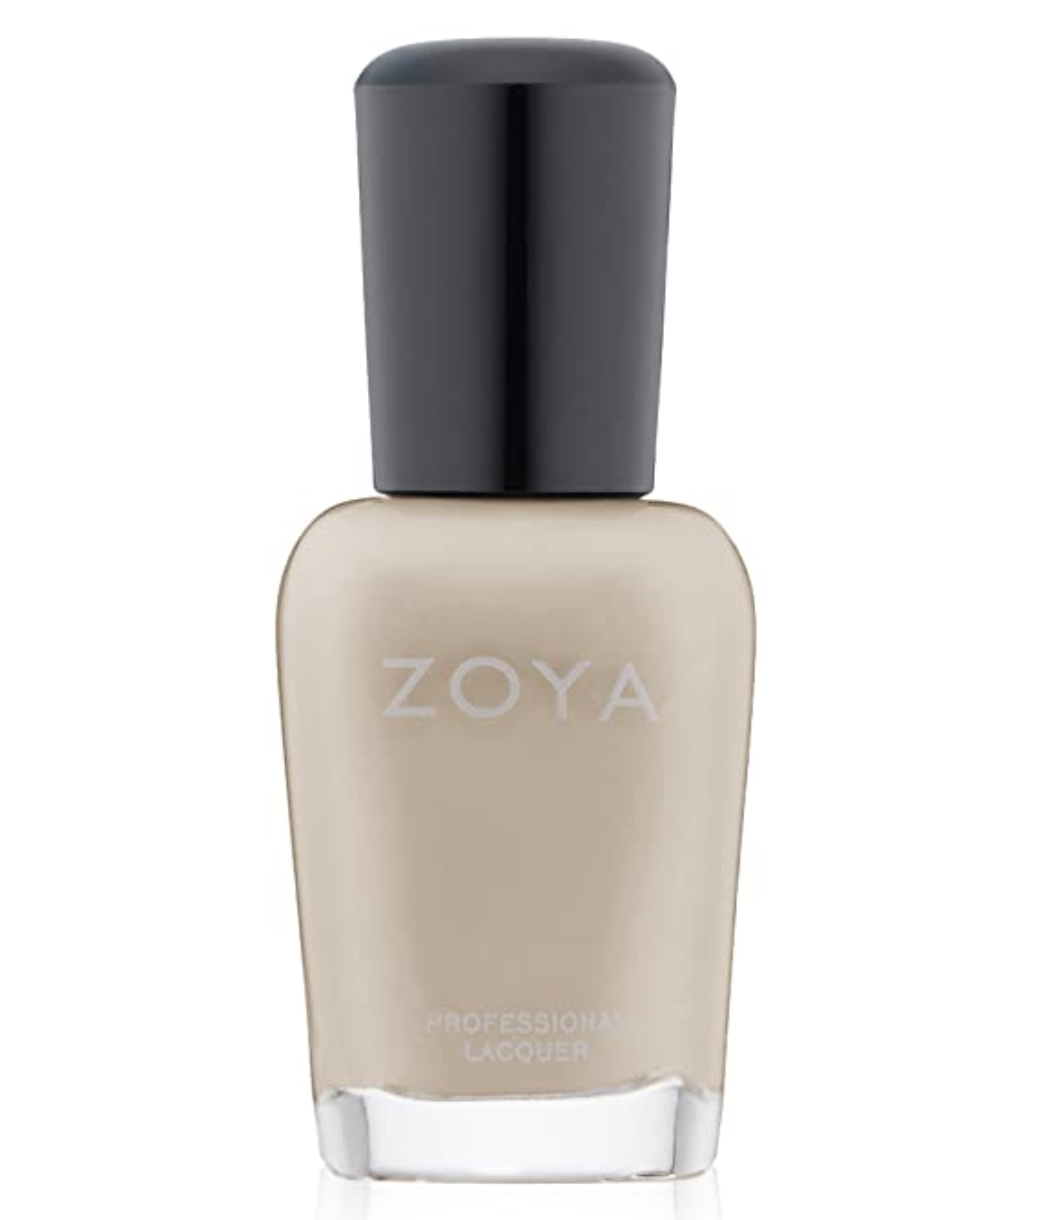 The 11 Best Nude Nail Polishes For Every Skin ToneHelloGiggles